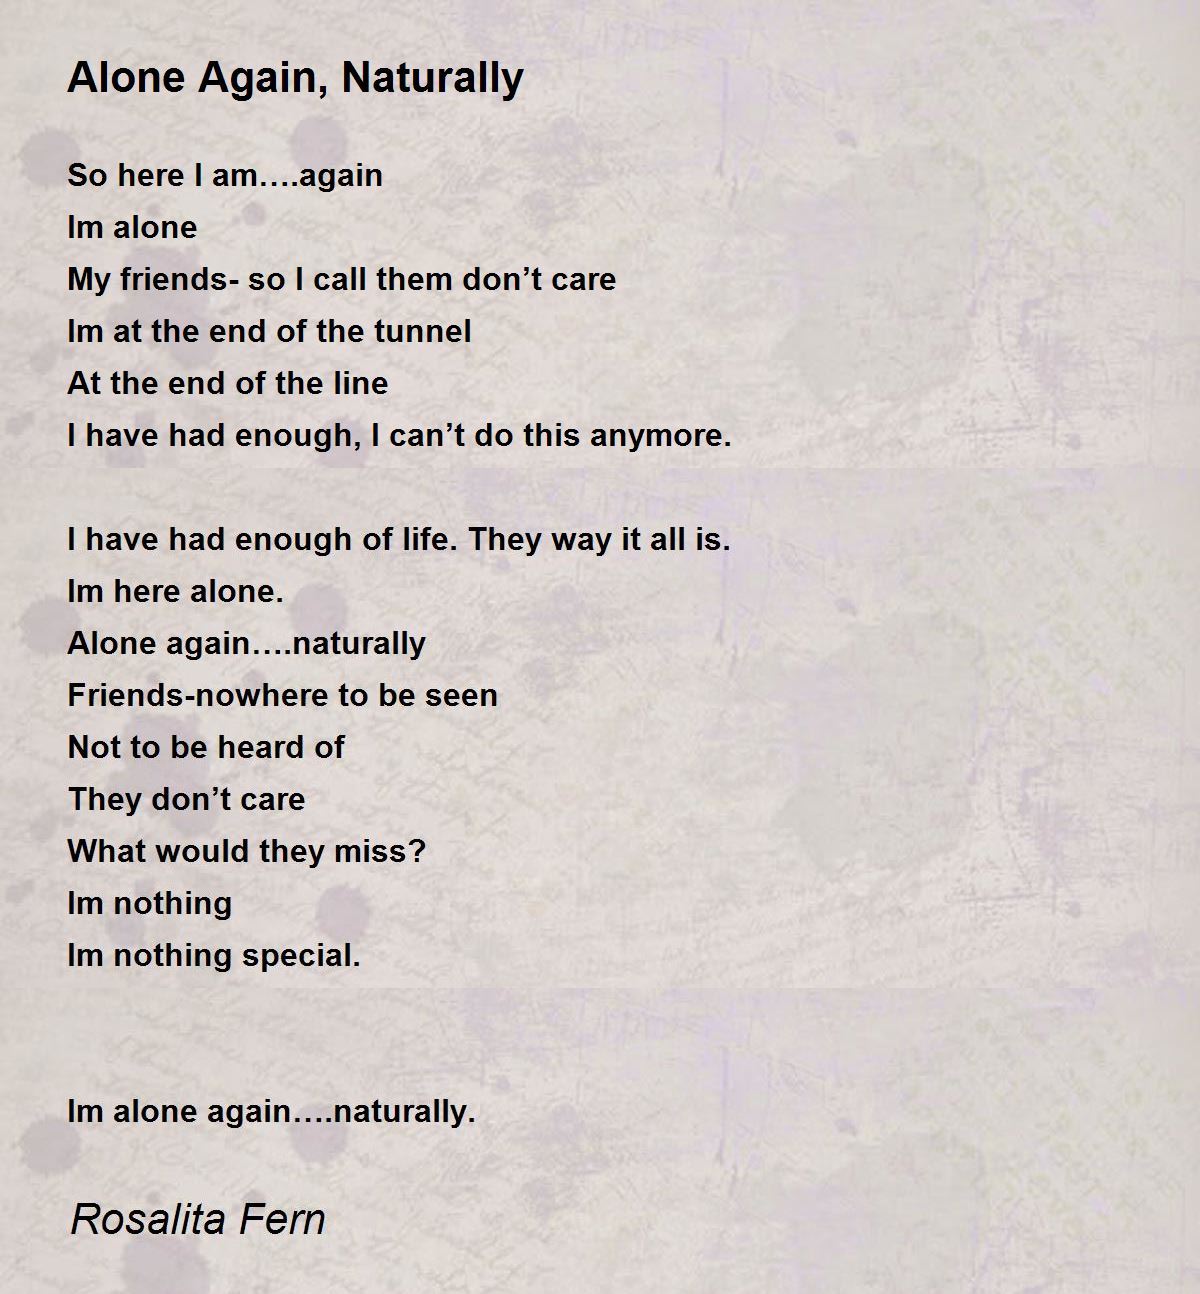 Alone again naturally. Someone asked for this song a long time ago! Su